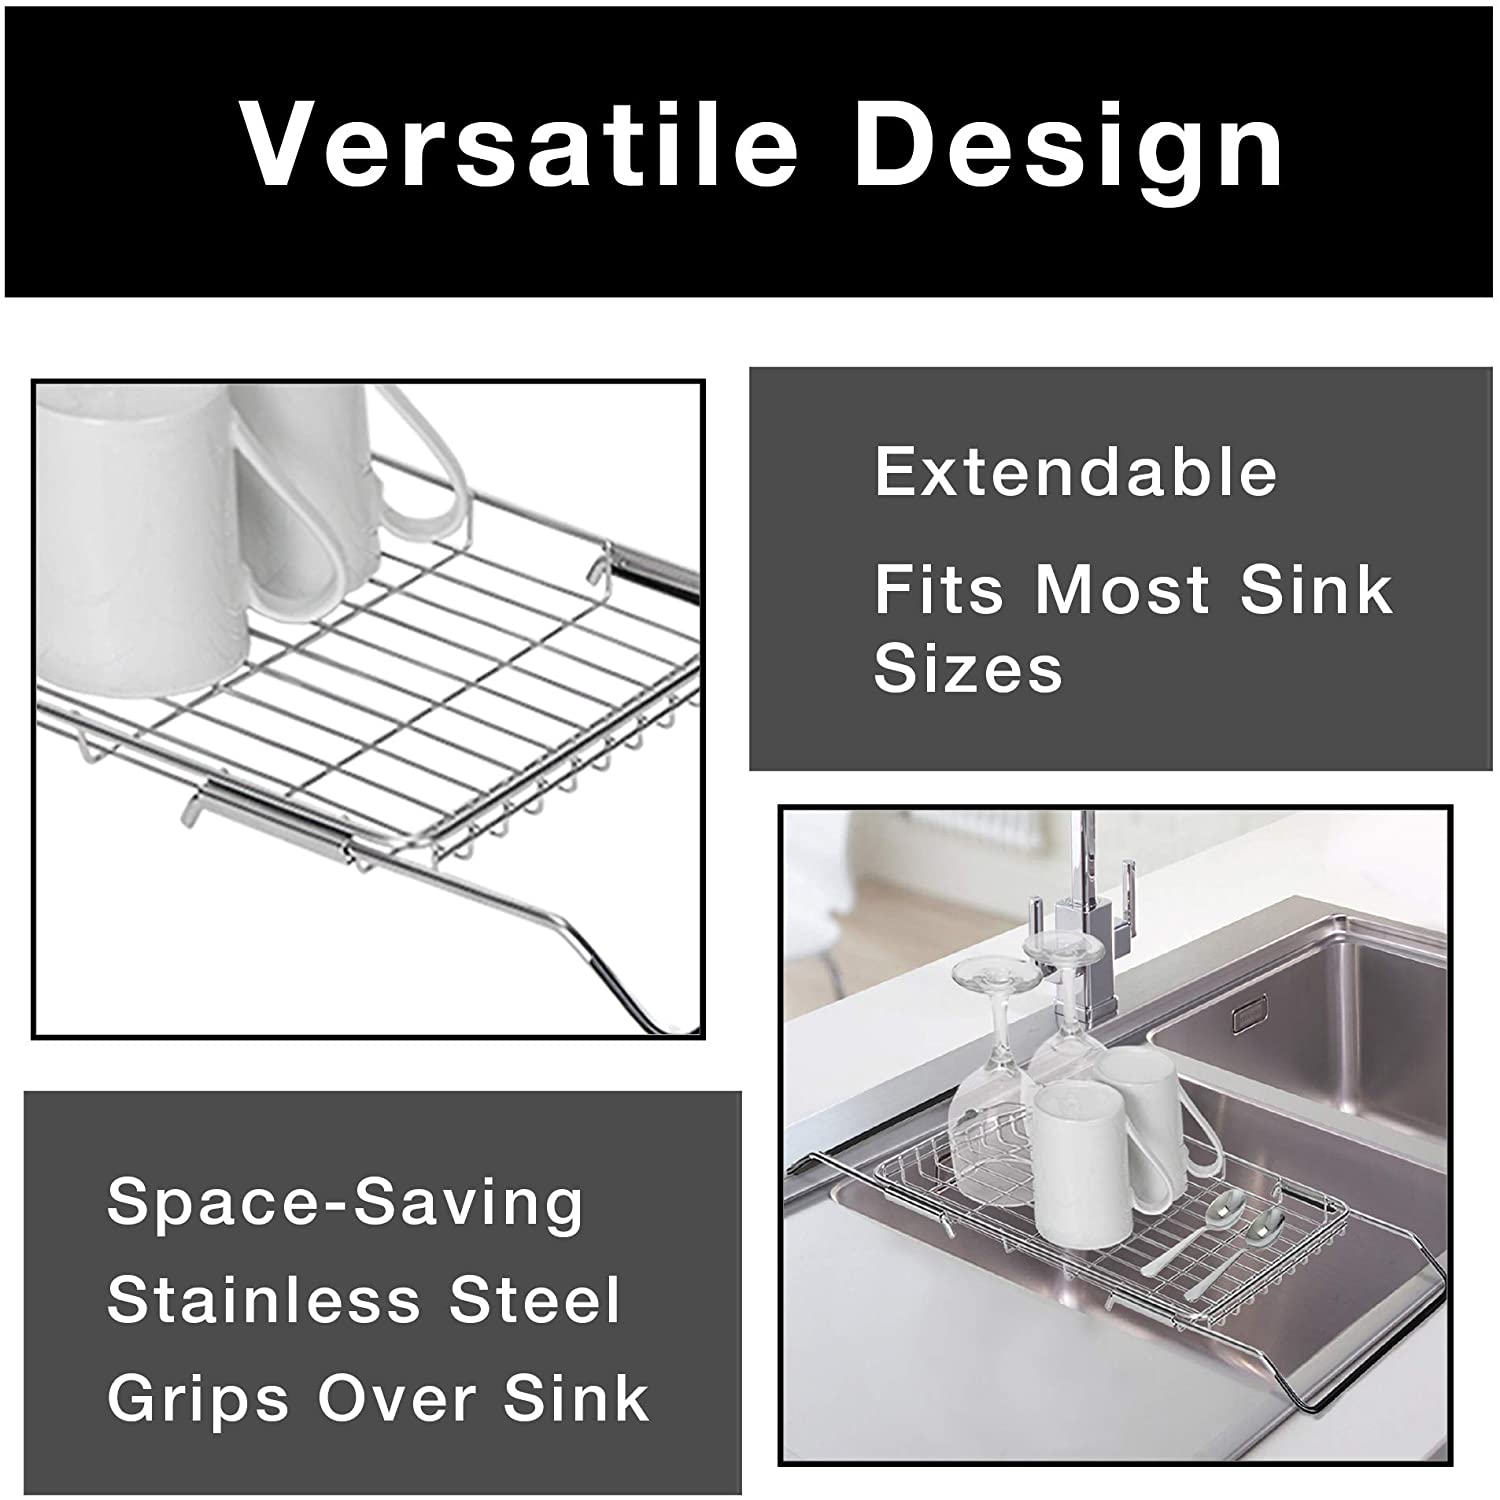 Expandable Dish Drainer with Adjustable Arms - Smart Design® 3